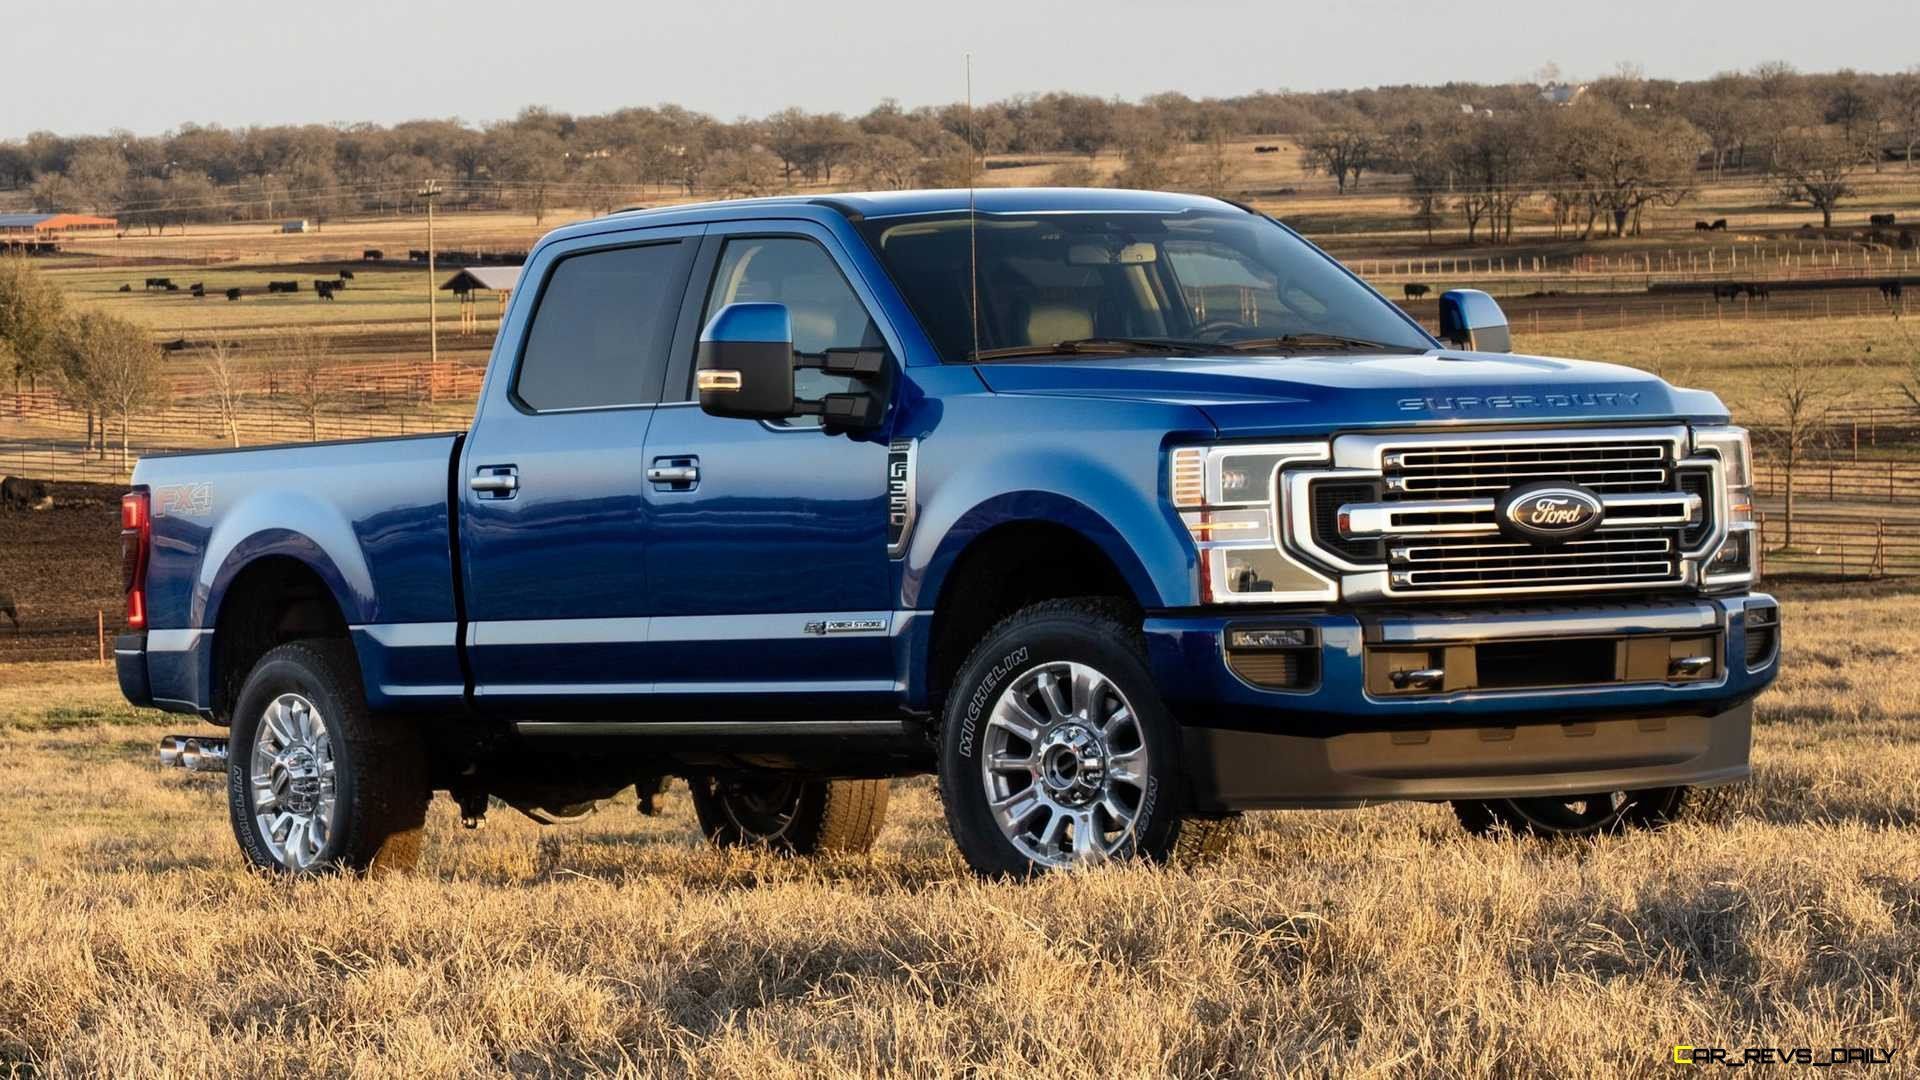 Ford Shows Off 2022 Super Duty, New Technology Highlights Minor Updates HD Pickup Trucks Car Revs Daily.com